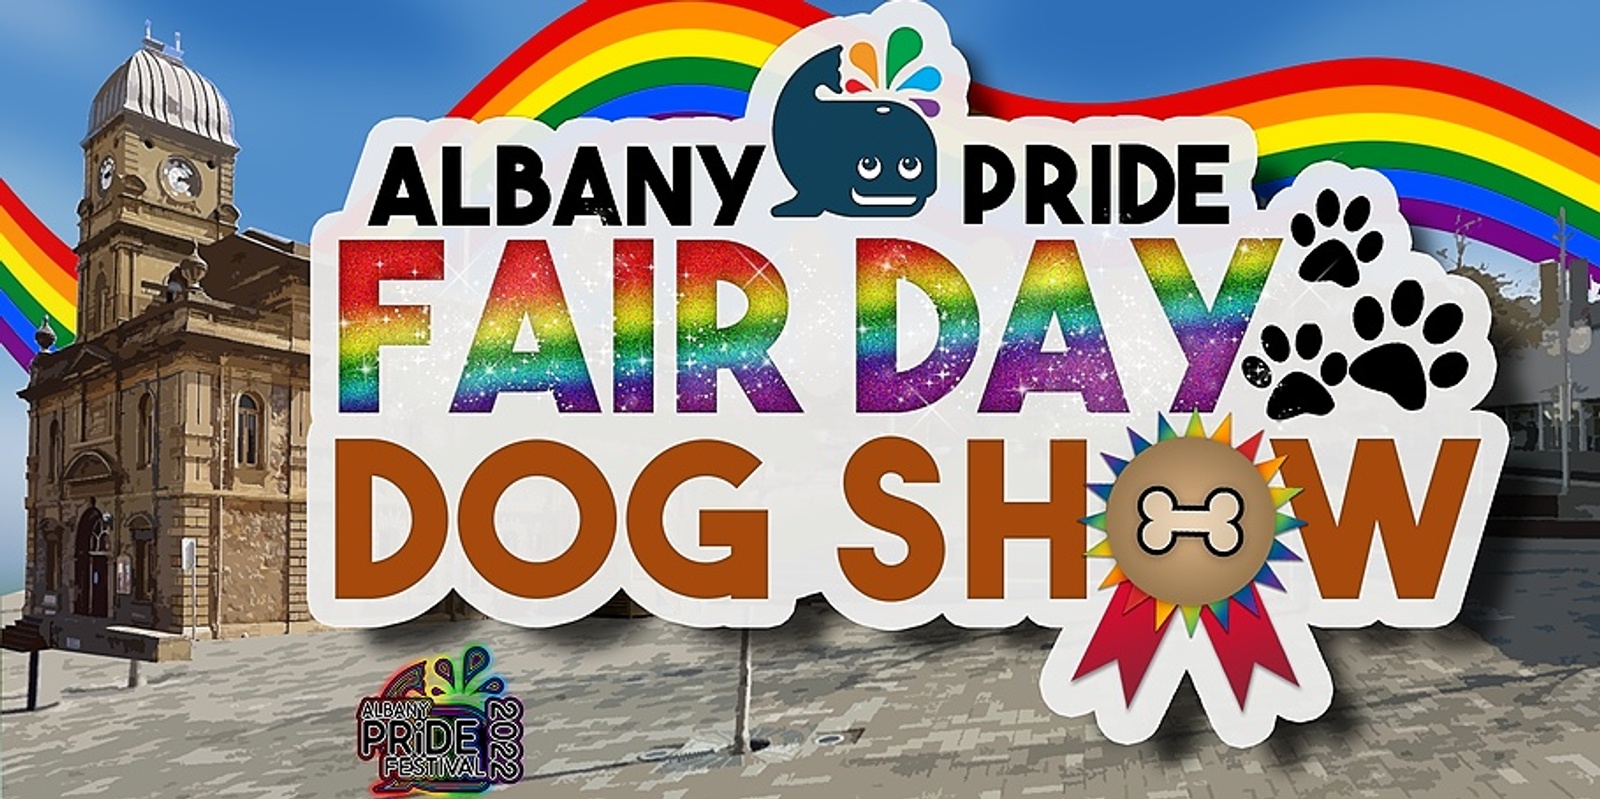 Banner image for Albany Pride Fair Day - Dog Show Registration 